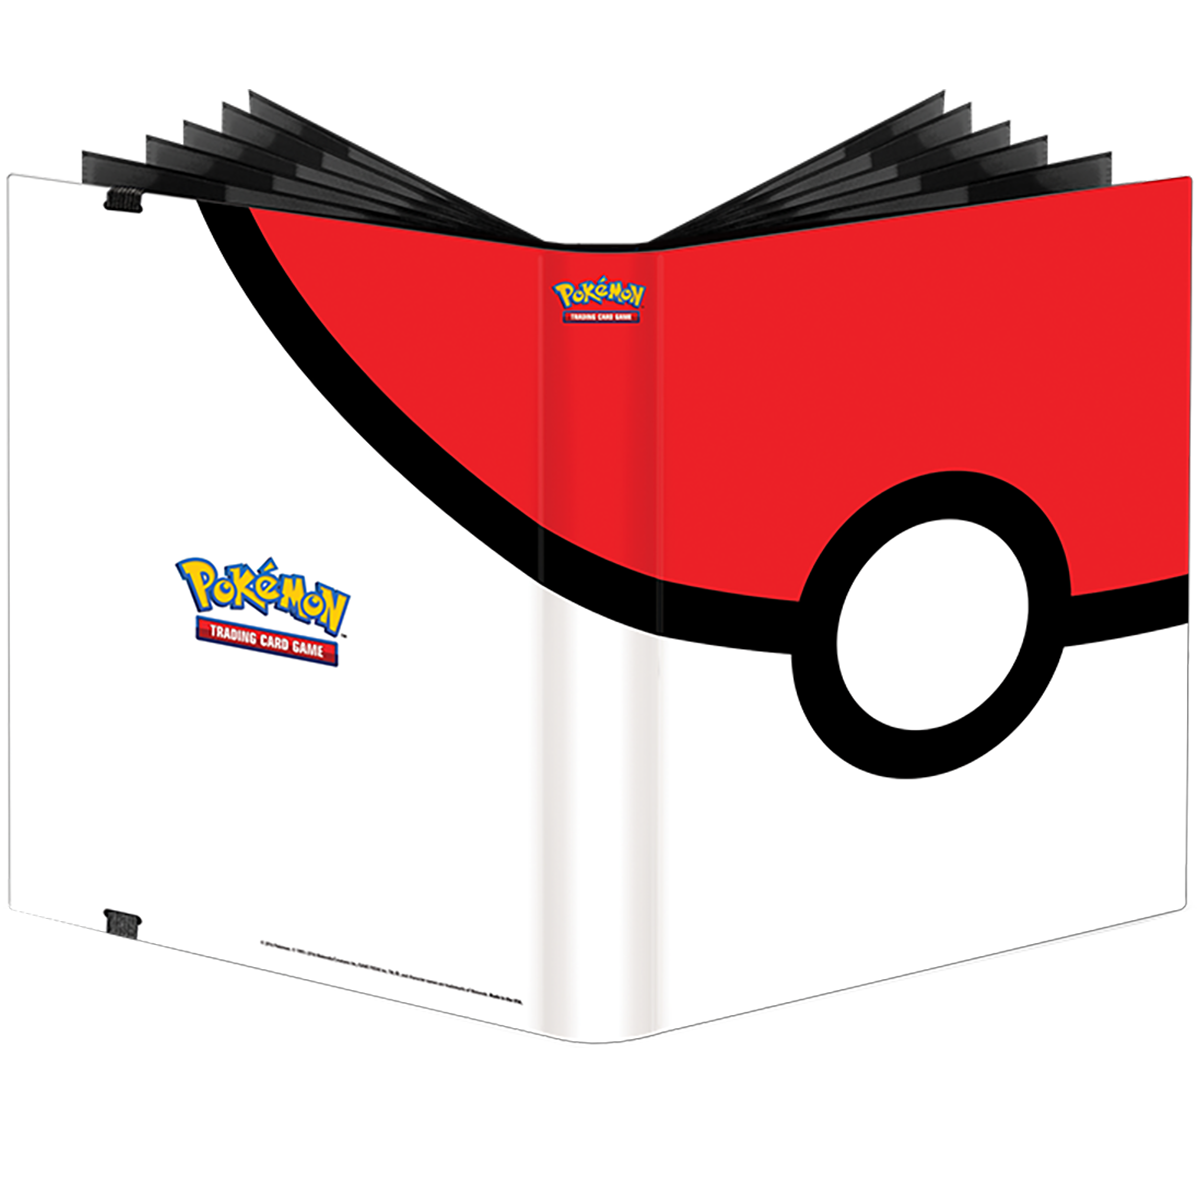 100 Pack 9 Pockets Trading Card Pages, 900 Pockets Double-Sided Trading  Card Pages Sleeves,Trading Card Sleeves for 3 Ring Binder for Pokemon  Cards, Sports Cards, Coupons, Game Cards.